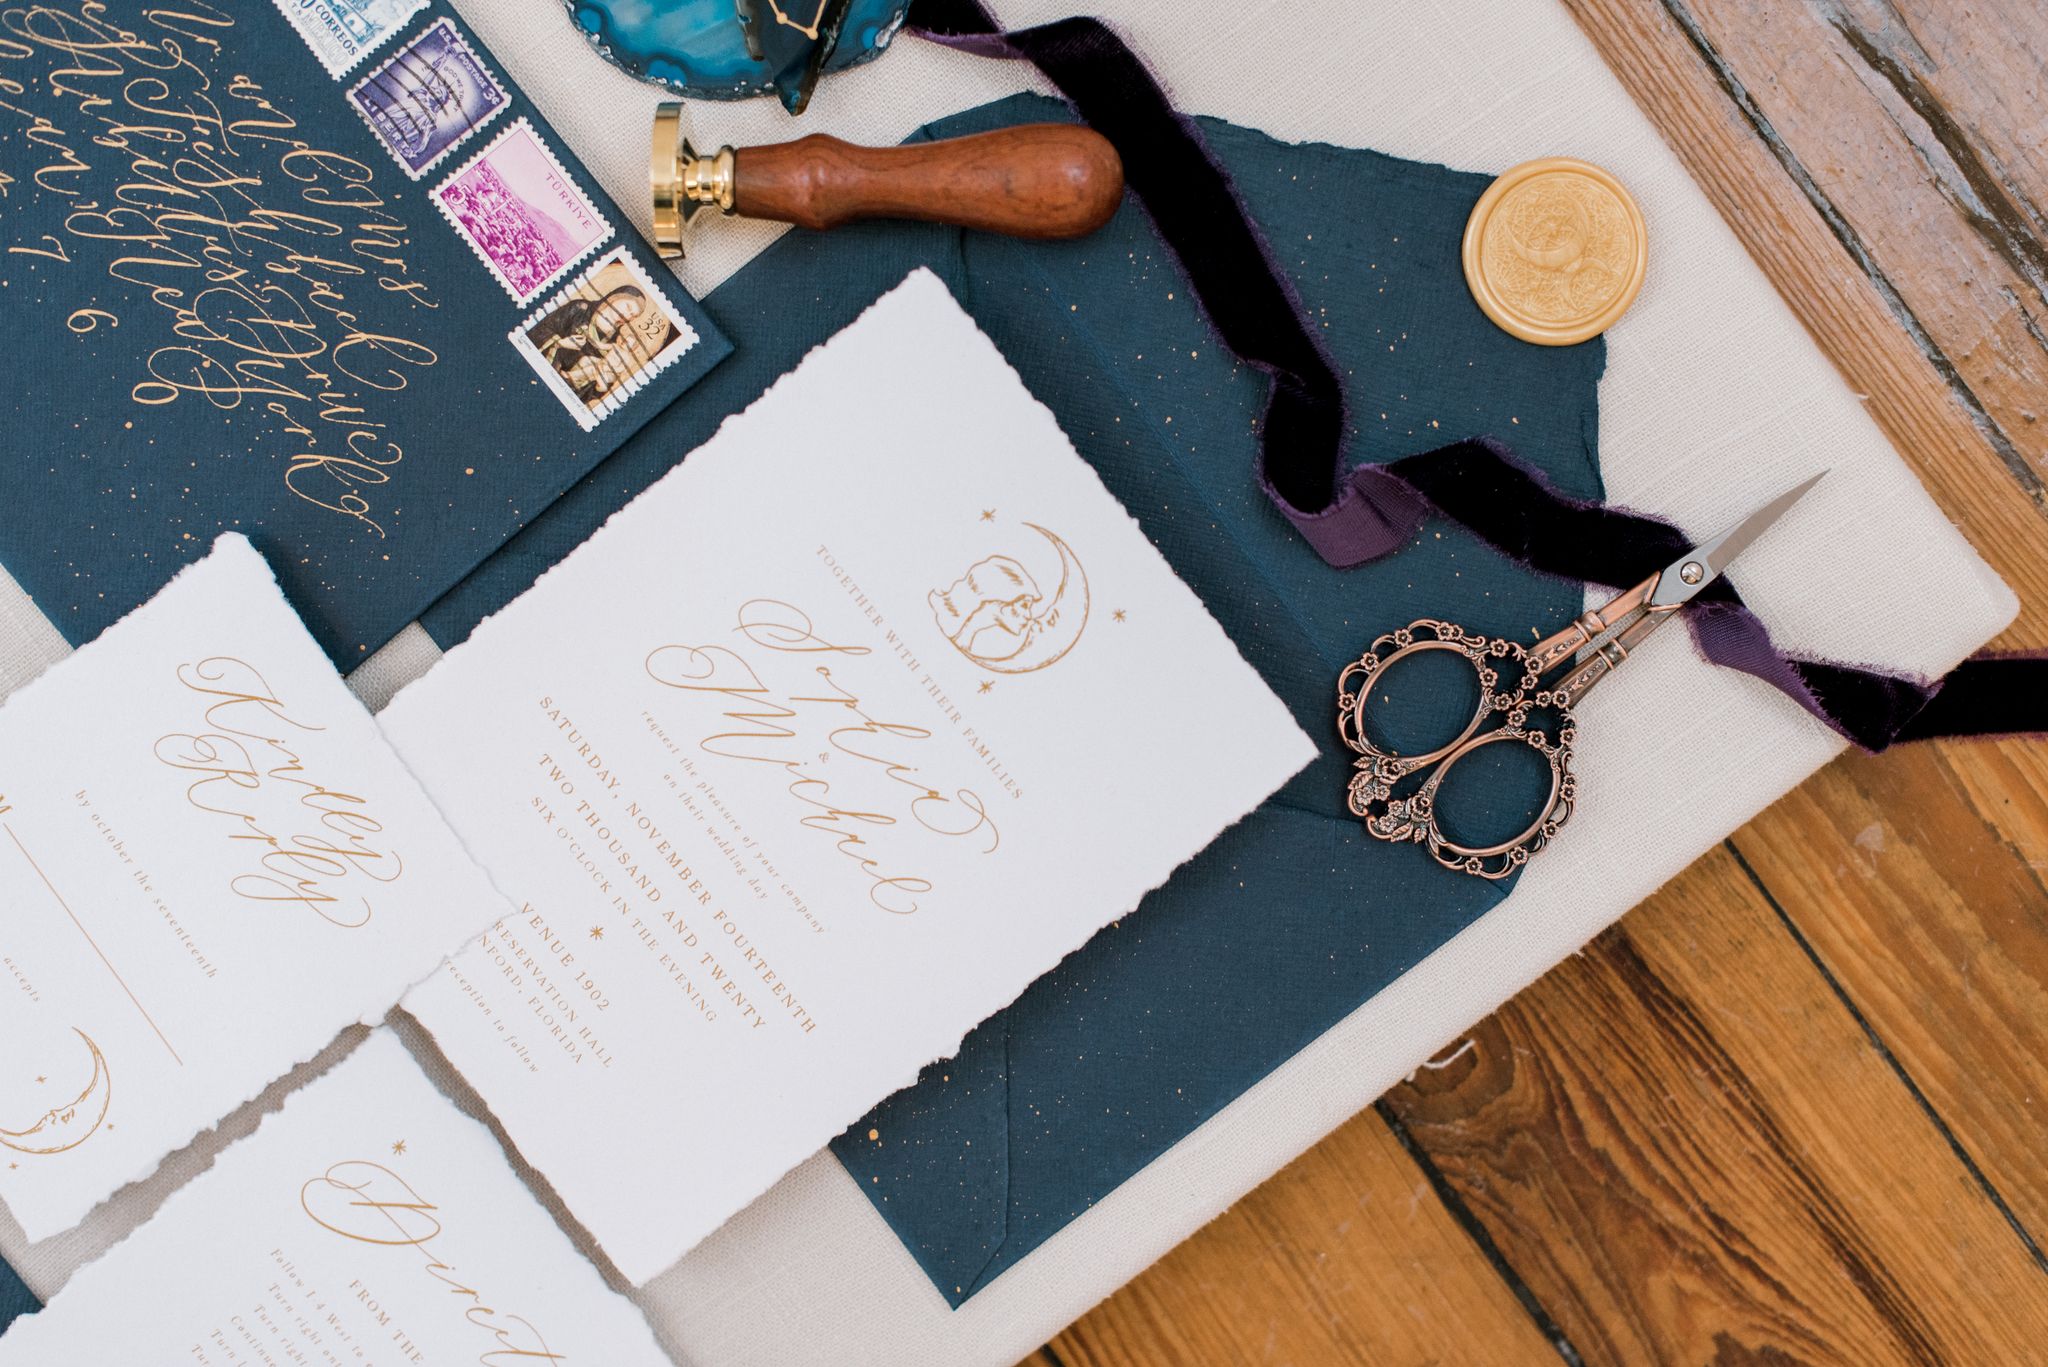 flat lay of wedding invitation and other personalized items from a calligrapher